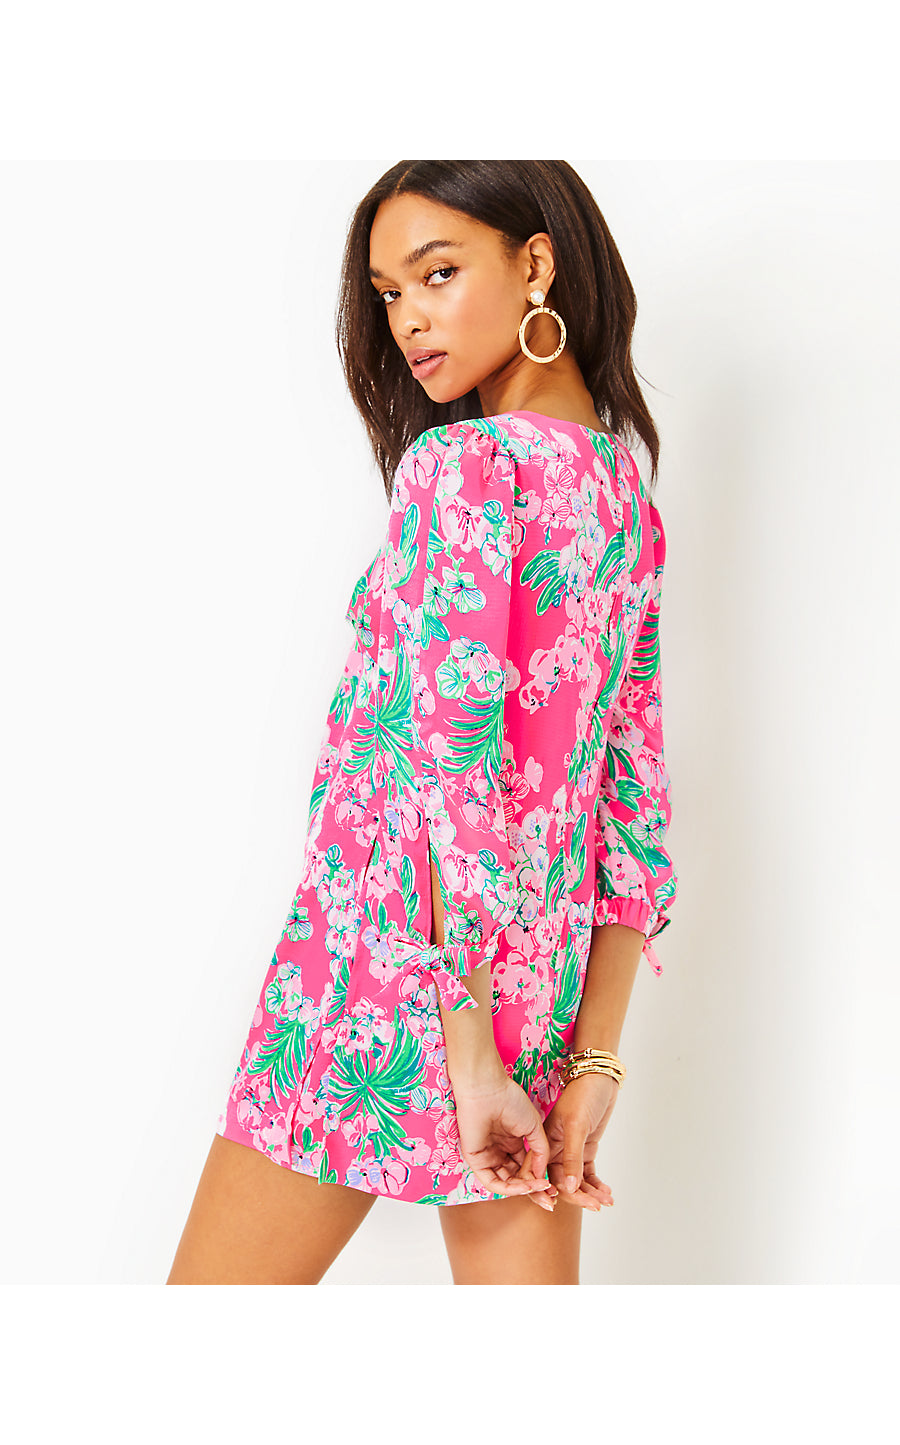 MAUDE LONG-SLEEVE ROMPER, ROXIE PINK WORTH A LOOK